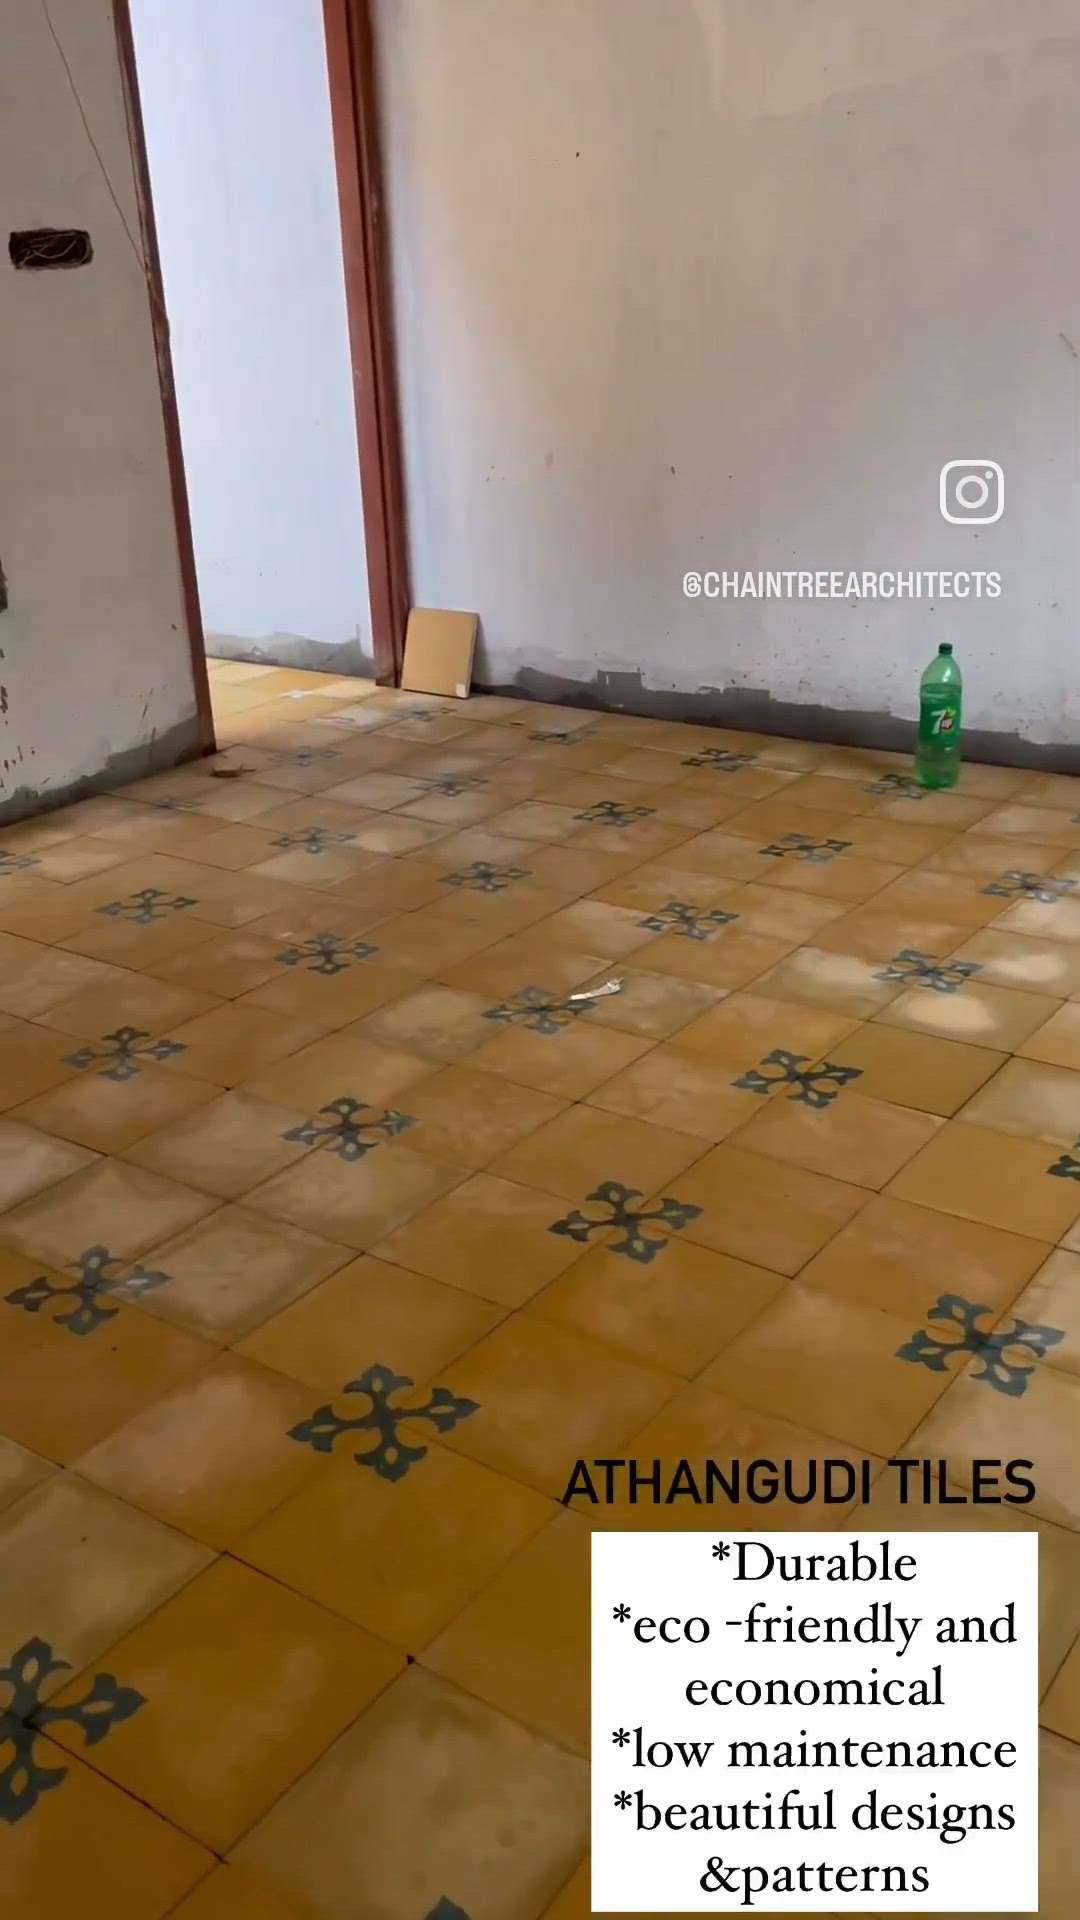 Athangudi tile work.

We can’t wait to see the charm of these tiles after finishing !

#tilework #athanguditiles #charminghomes #TraditionalHouse #keralahomeinterior #tile_work #Architectural&Interior #athangudi #Flooring #interiordesignkerala #chaintreearchitects #chaintreearchitectskollam #tharavadu #traditionalstylehouse #traditionalbeauty #constructionsite #HouseConstruction